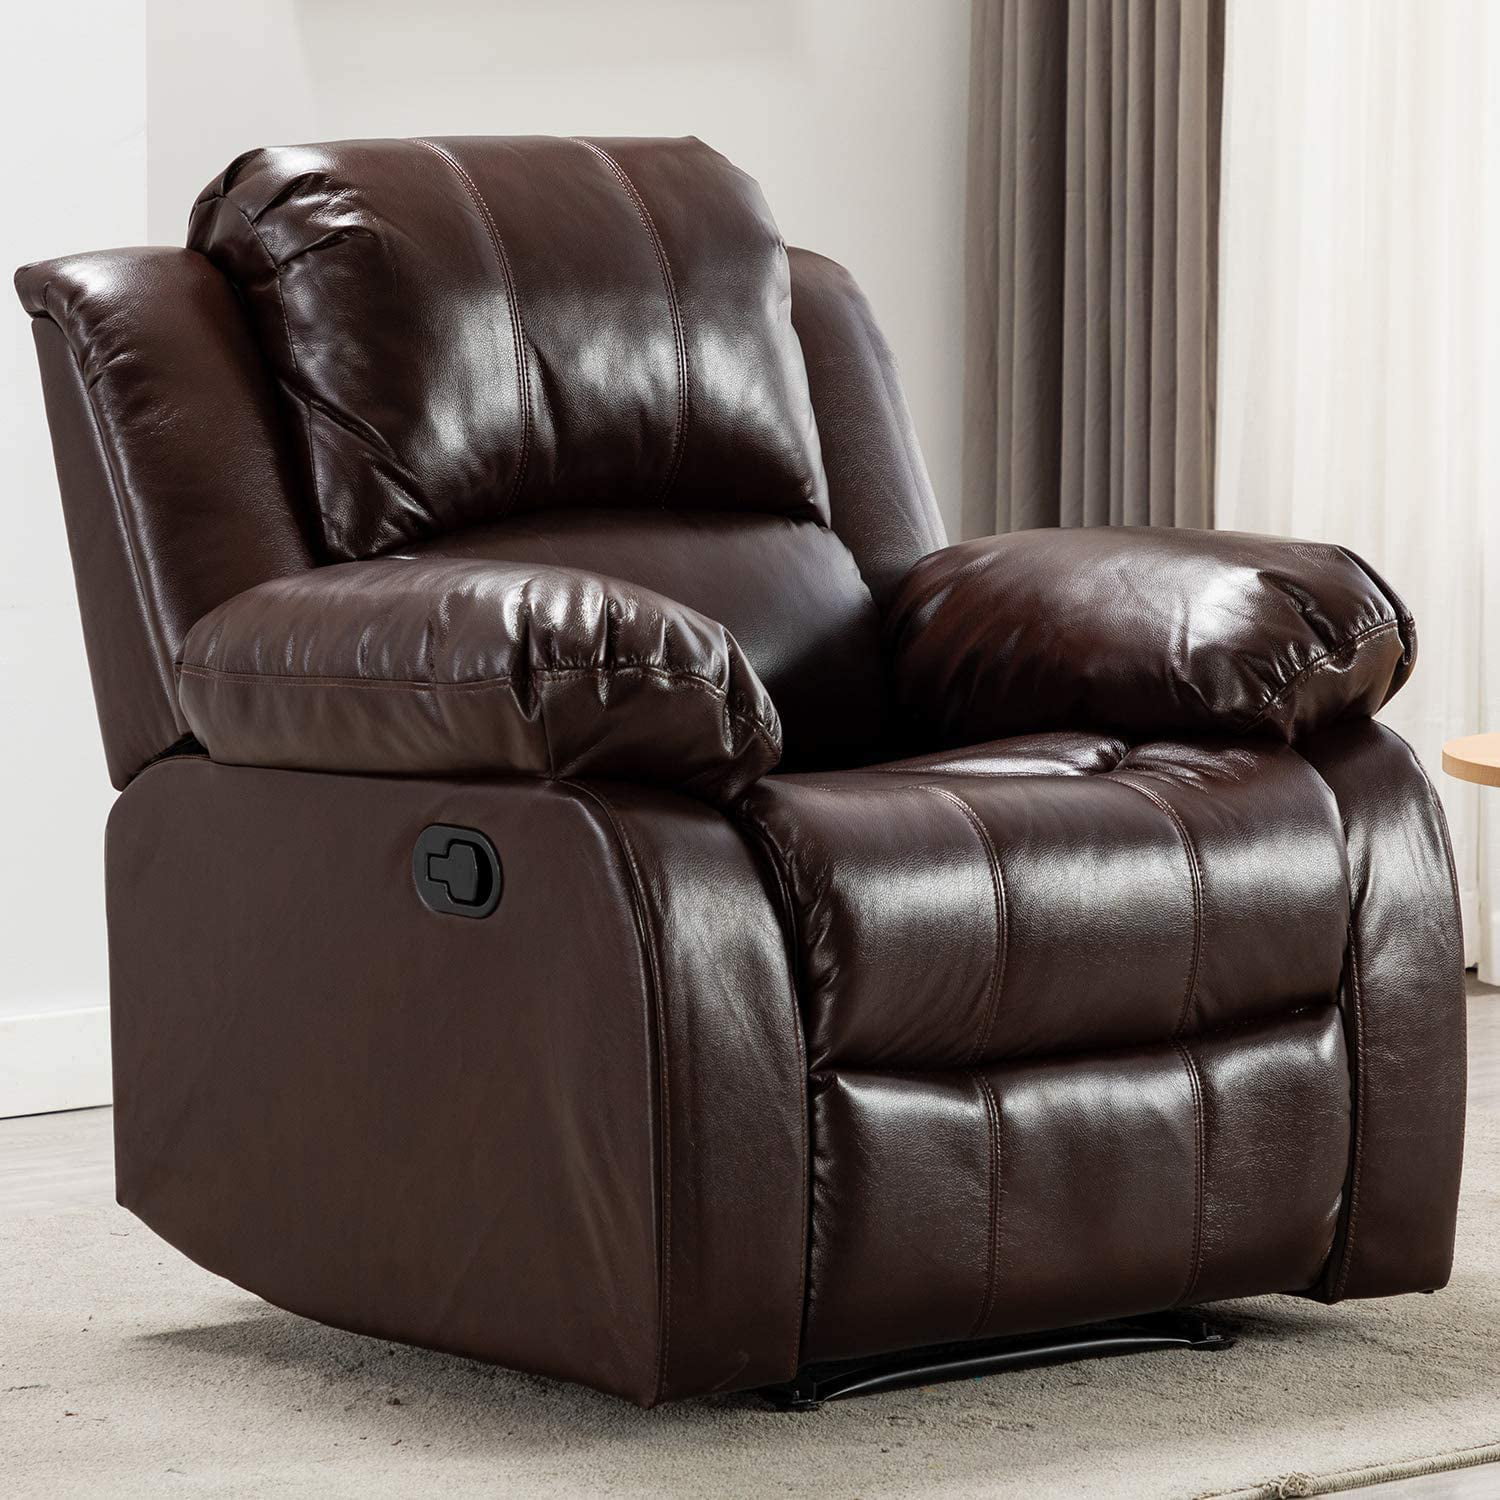 Home Air Leather Recliner Chair Overstuffed Heavy Duty Recliner - Faux